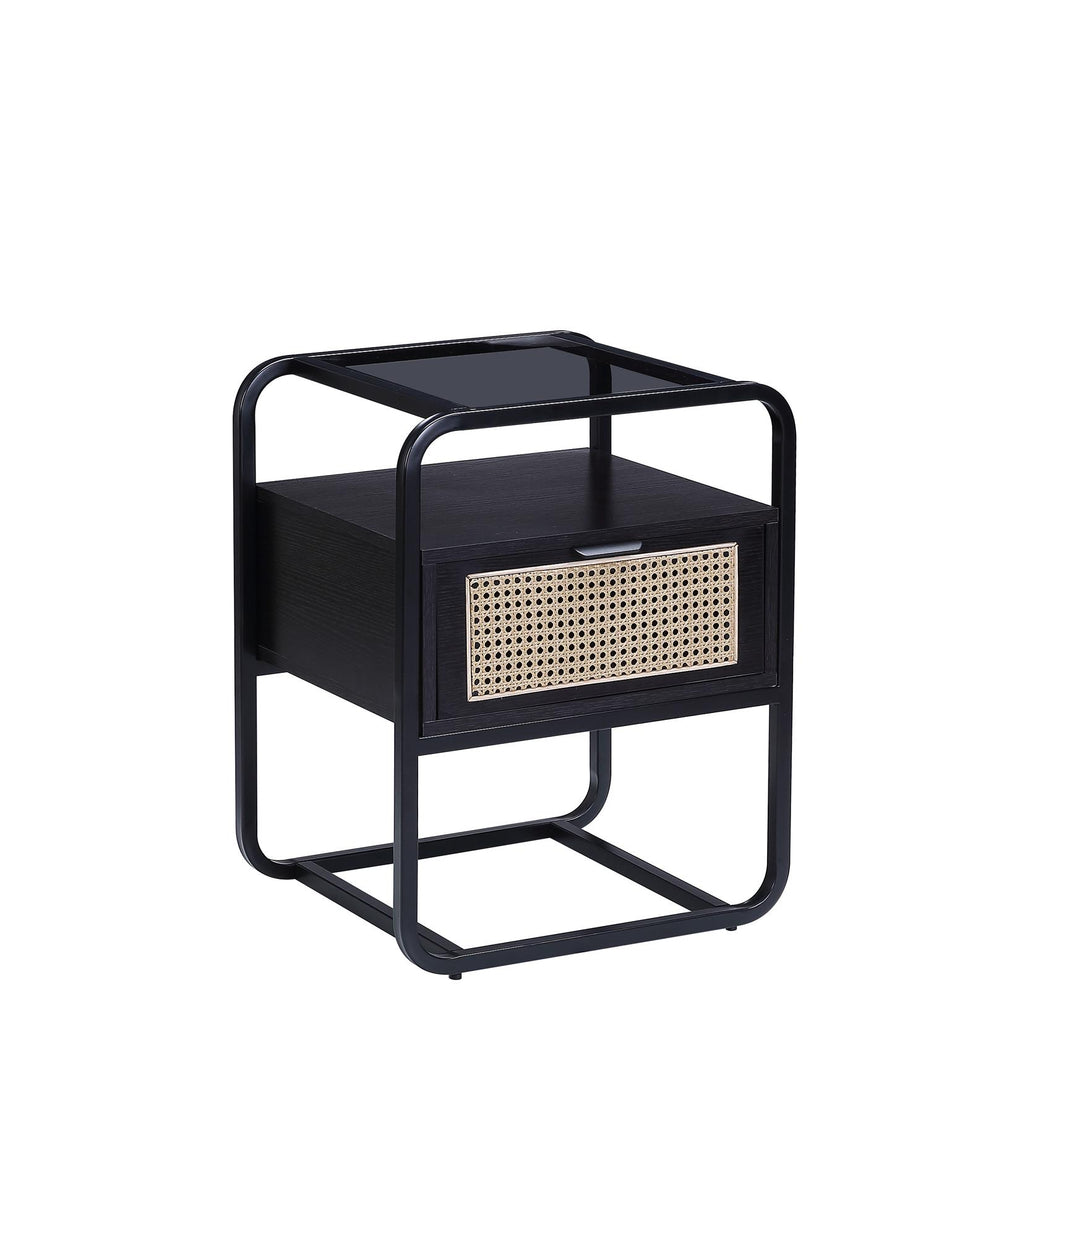 Colson table with metal frame and open storage -  Black